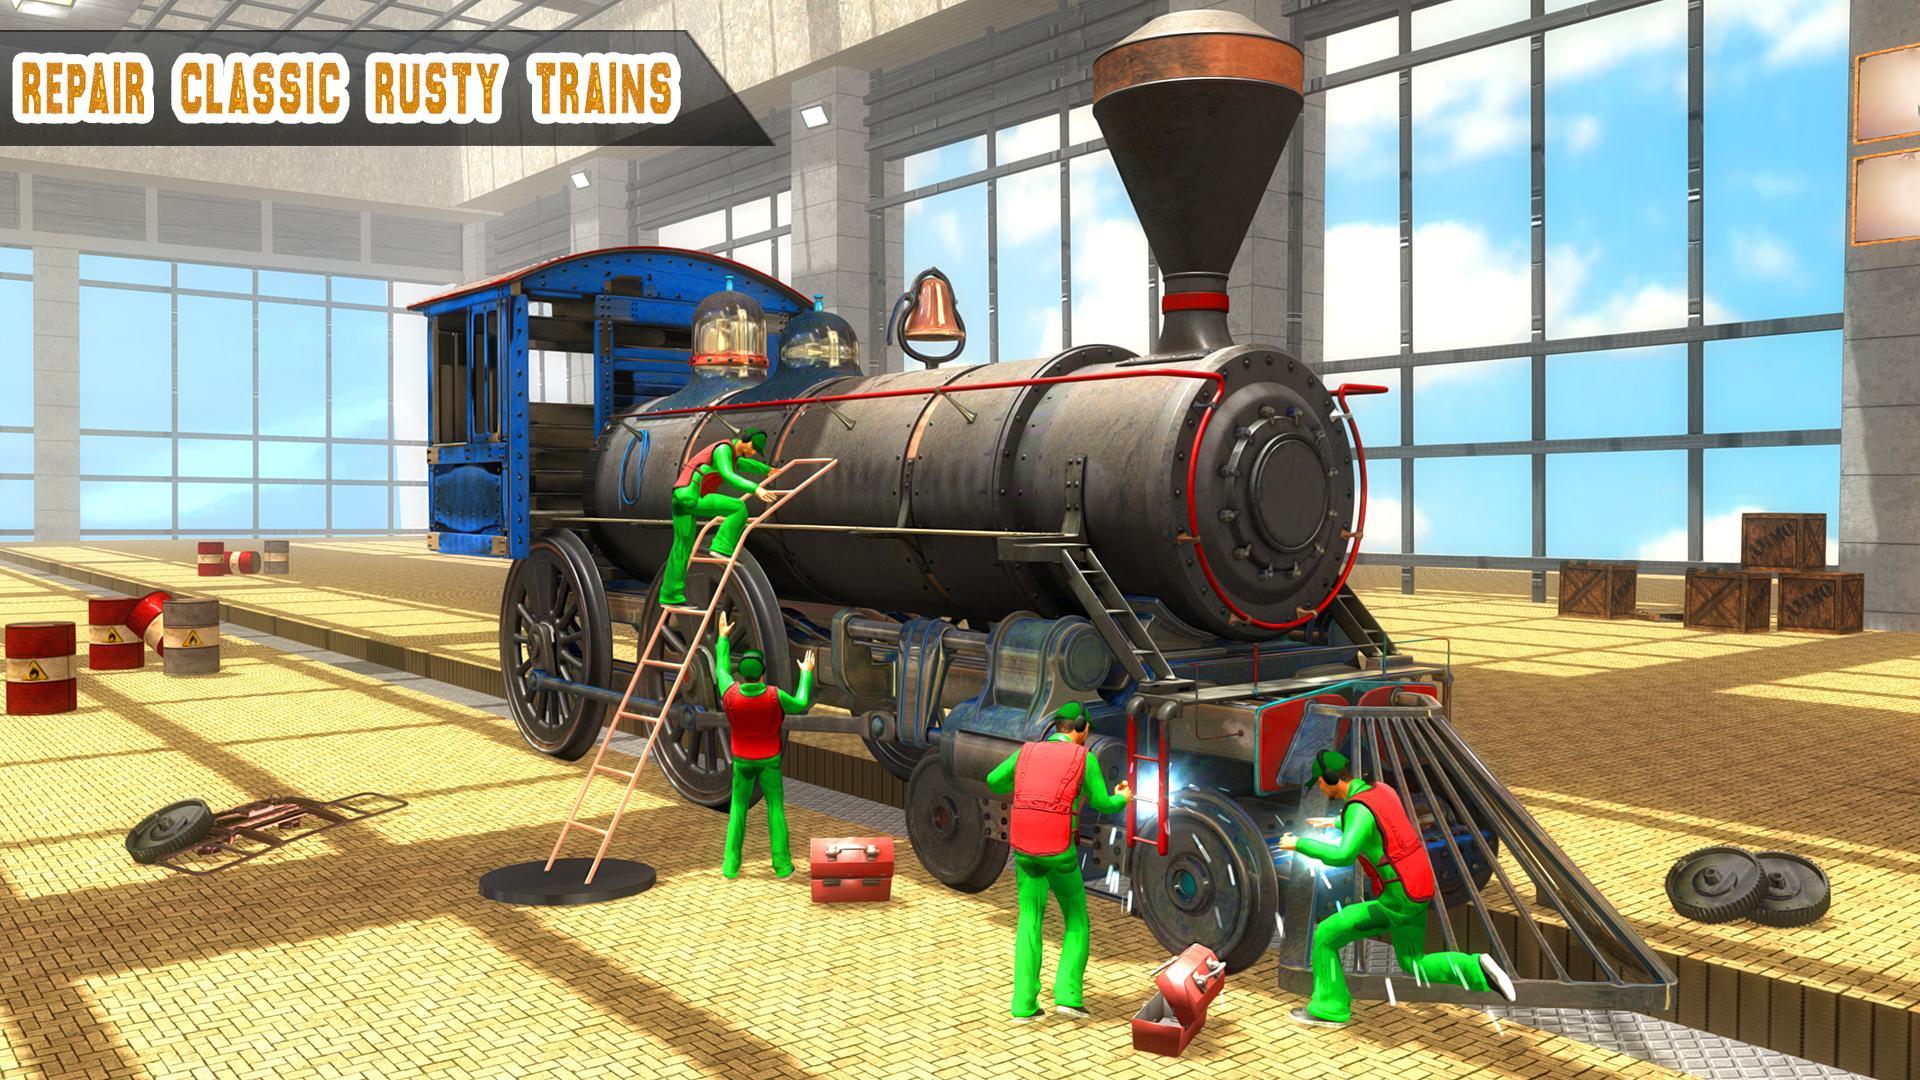 Train Mechanic Simulator Free: Train games 2018 for Android - APK Download